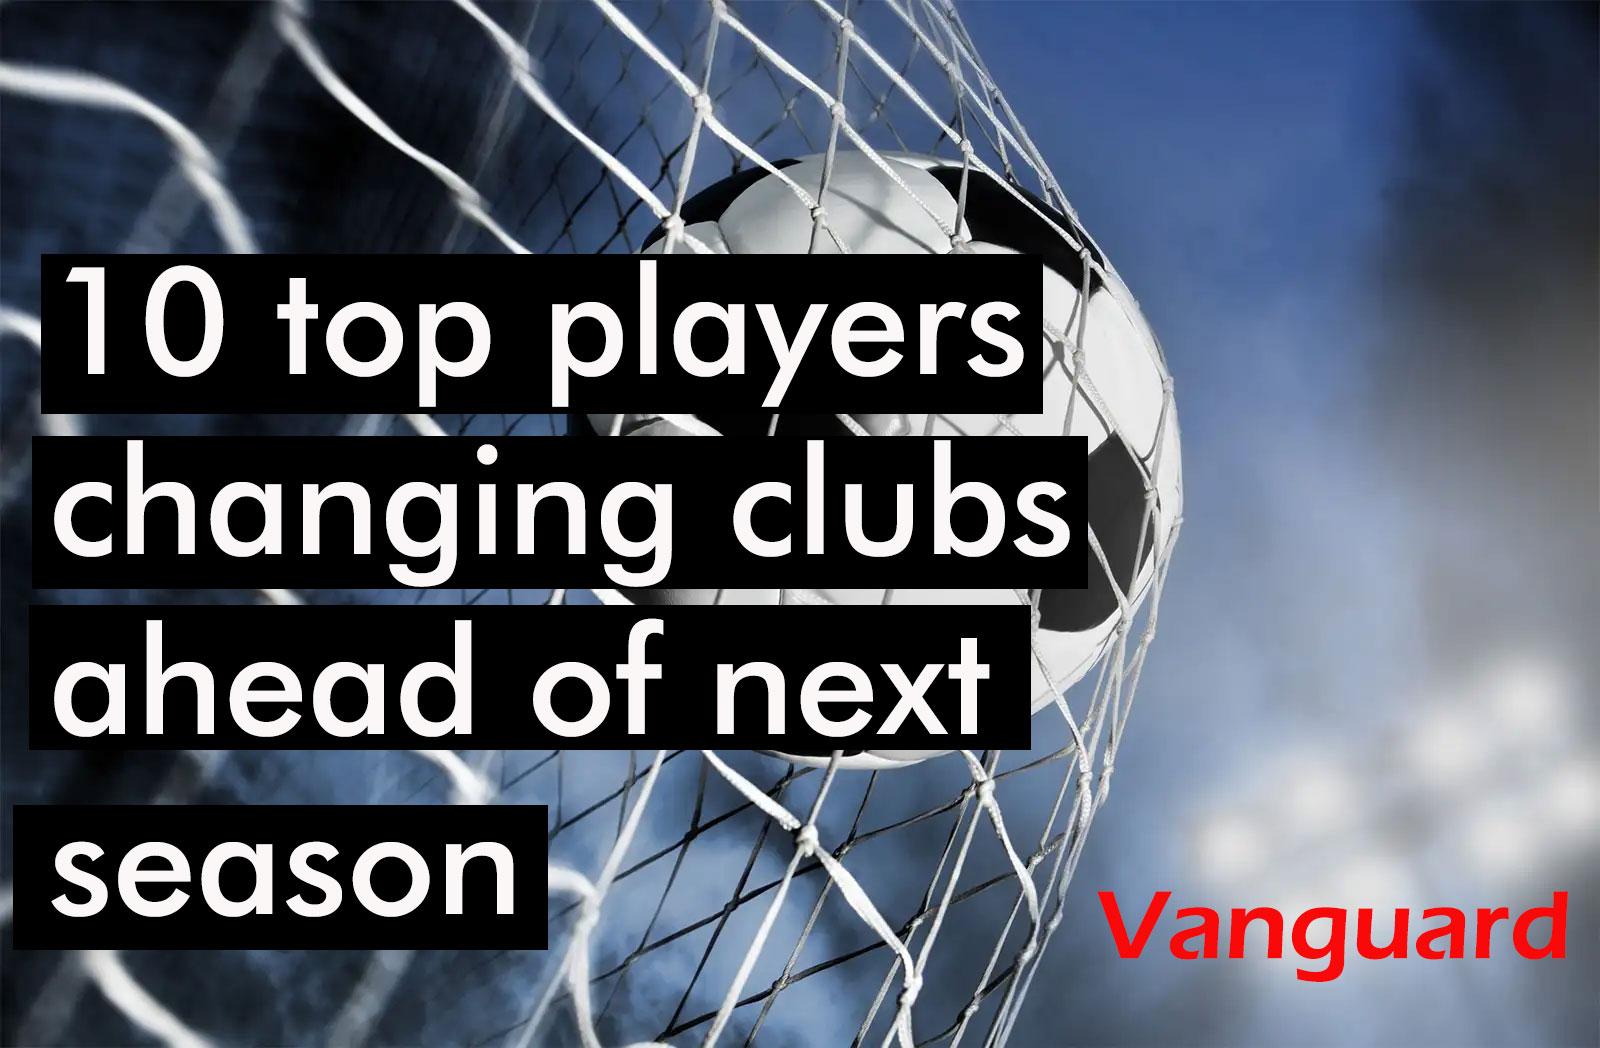 10 top players changing clubs ahead of next season